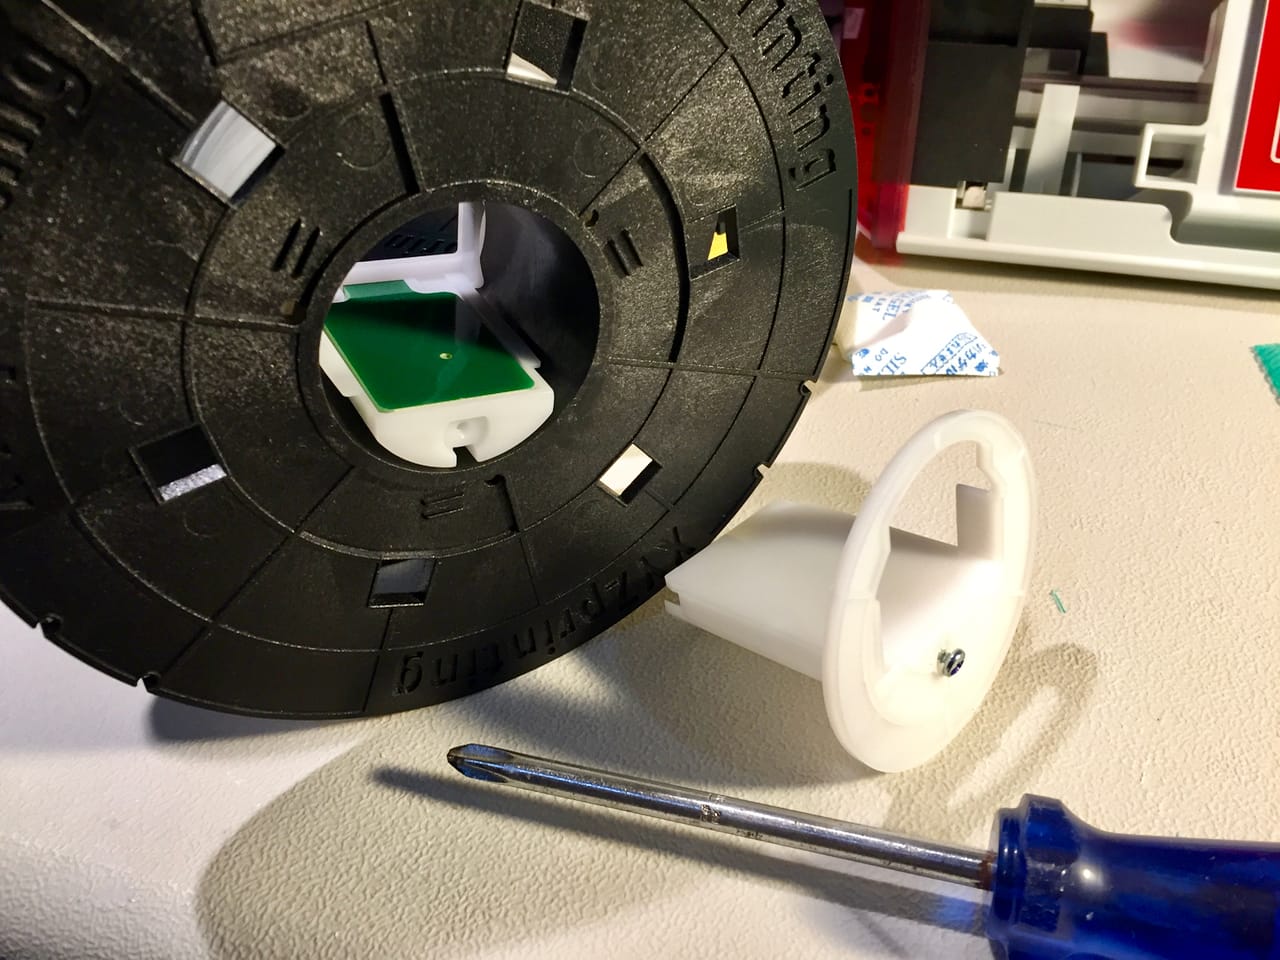  Installing the electronic chip on a filament spool for the da Vinci Jr. 2.0 Mix 